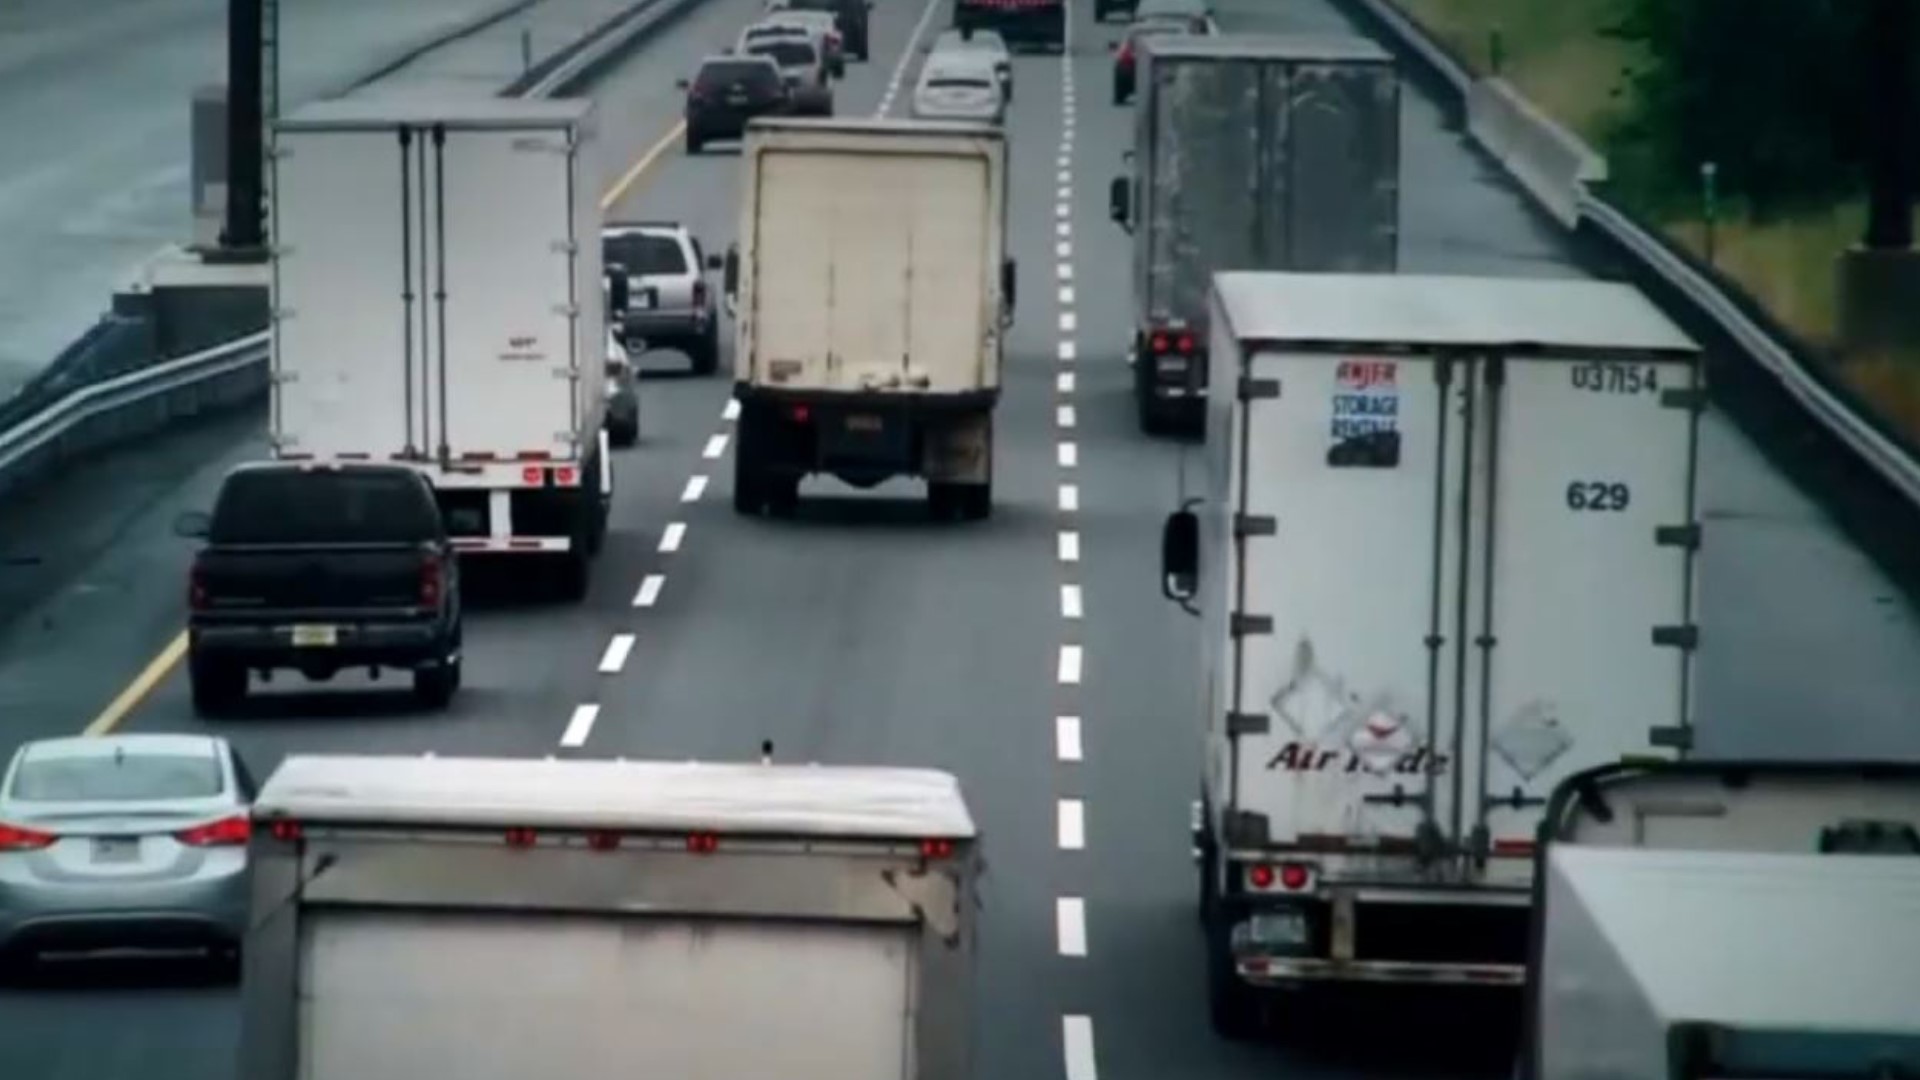 Trucking officials in our area and beyond say they're desperate for pro drivers. Newswatch 16's Sarah Buynovsky reports they're hoping more women apply.